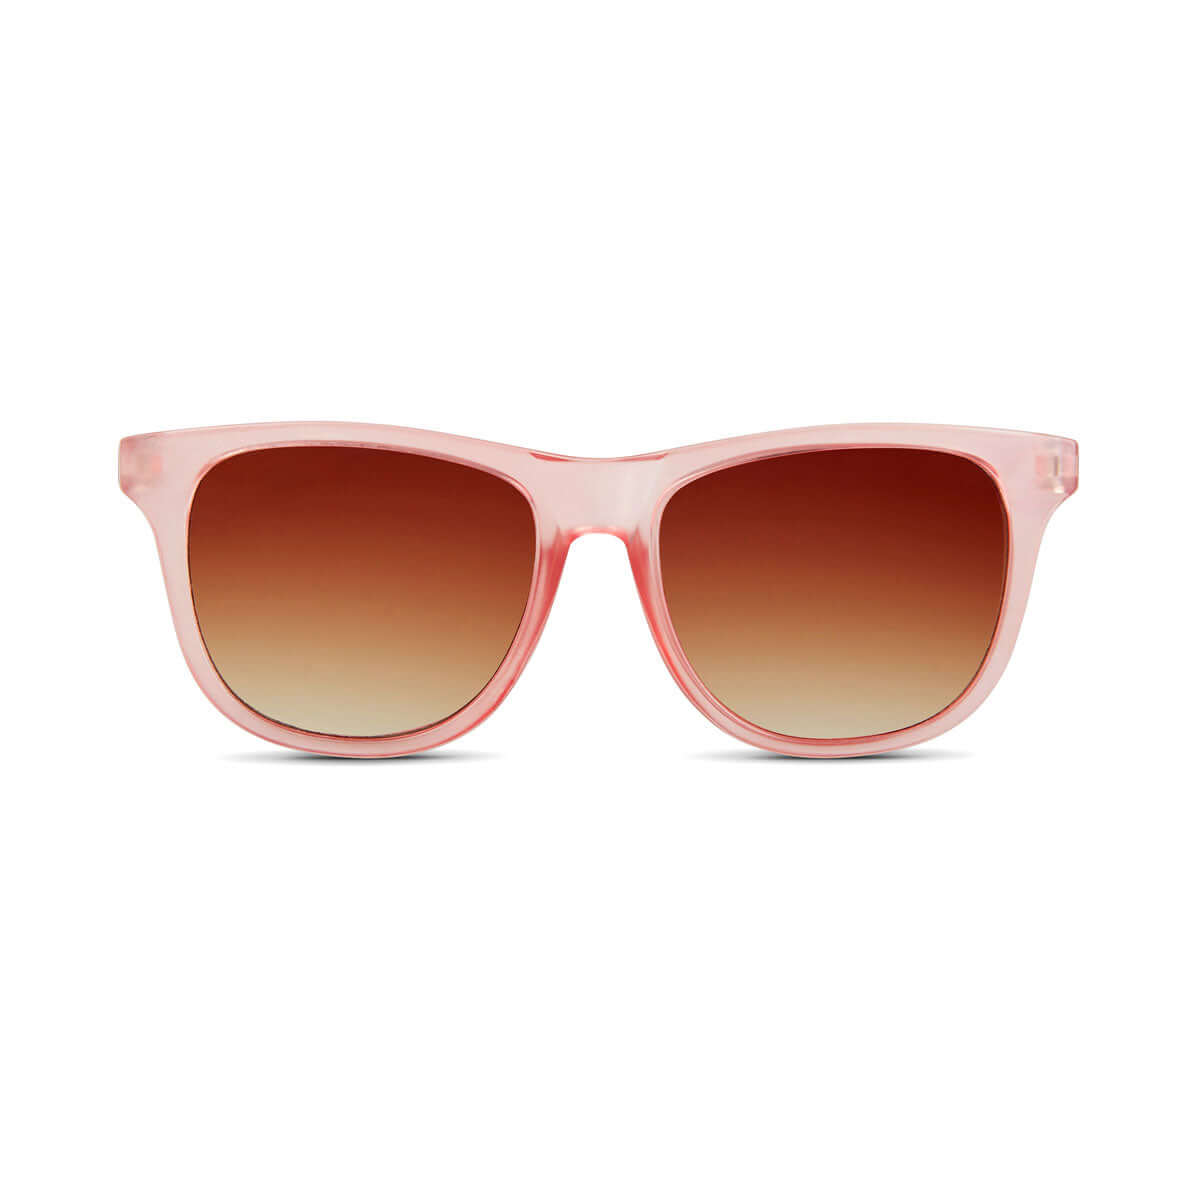 Sunglasses Hipsterkid Fancy Extra Baby |